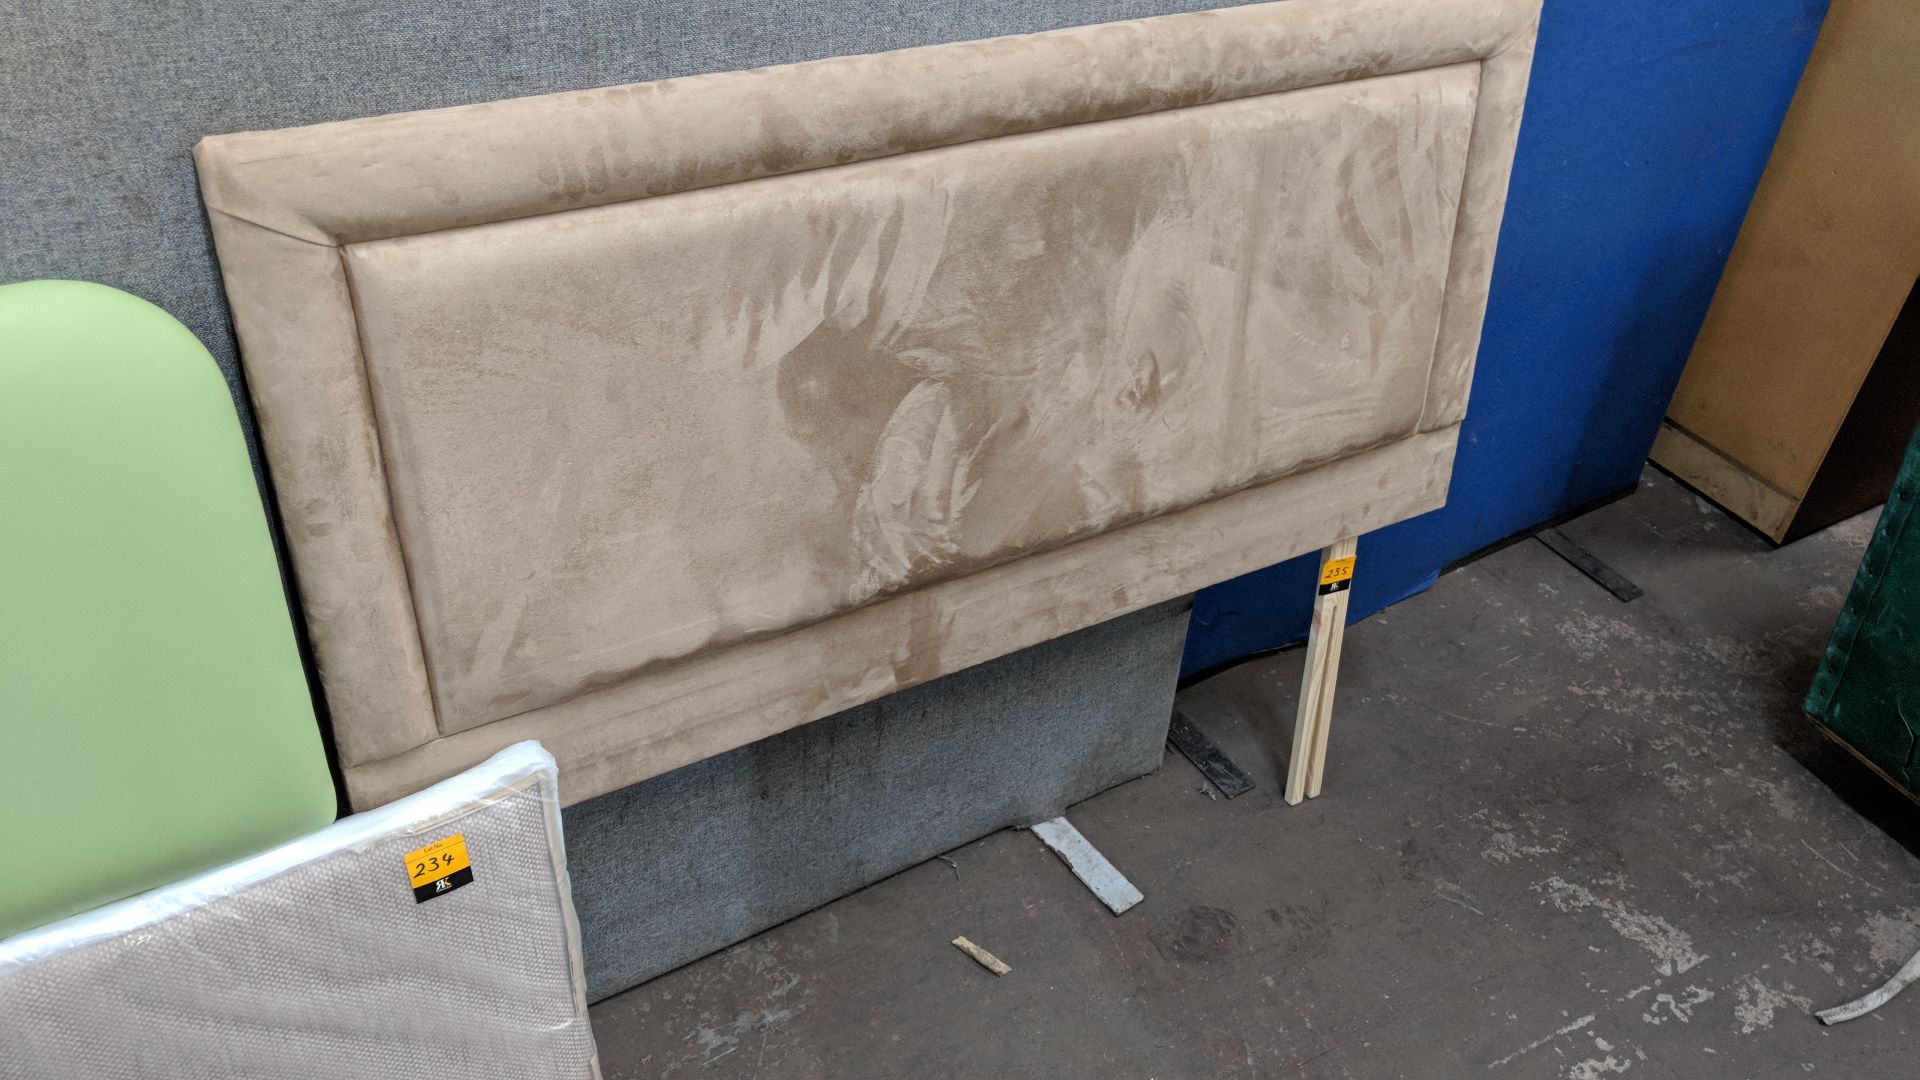 Light brown upholstered headboard in suede type fabric approximately 54" wide IMPORTANT: Please